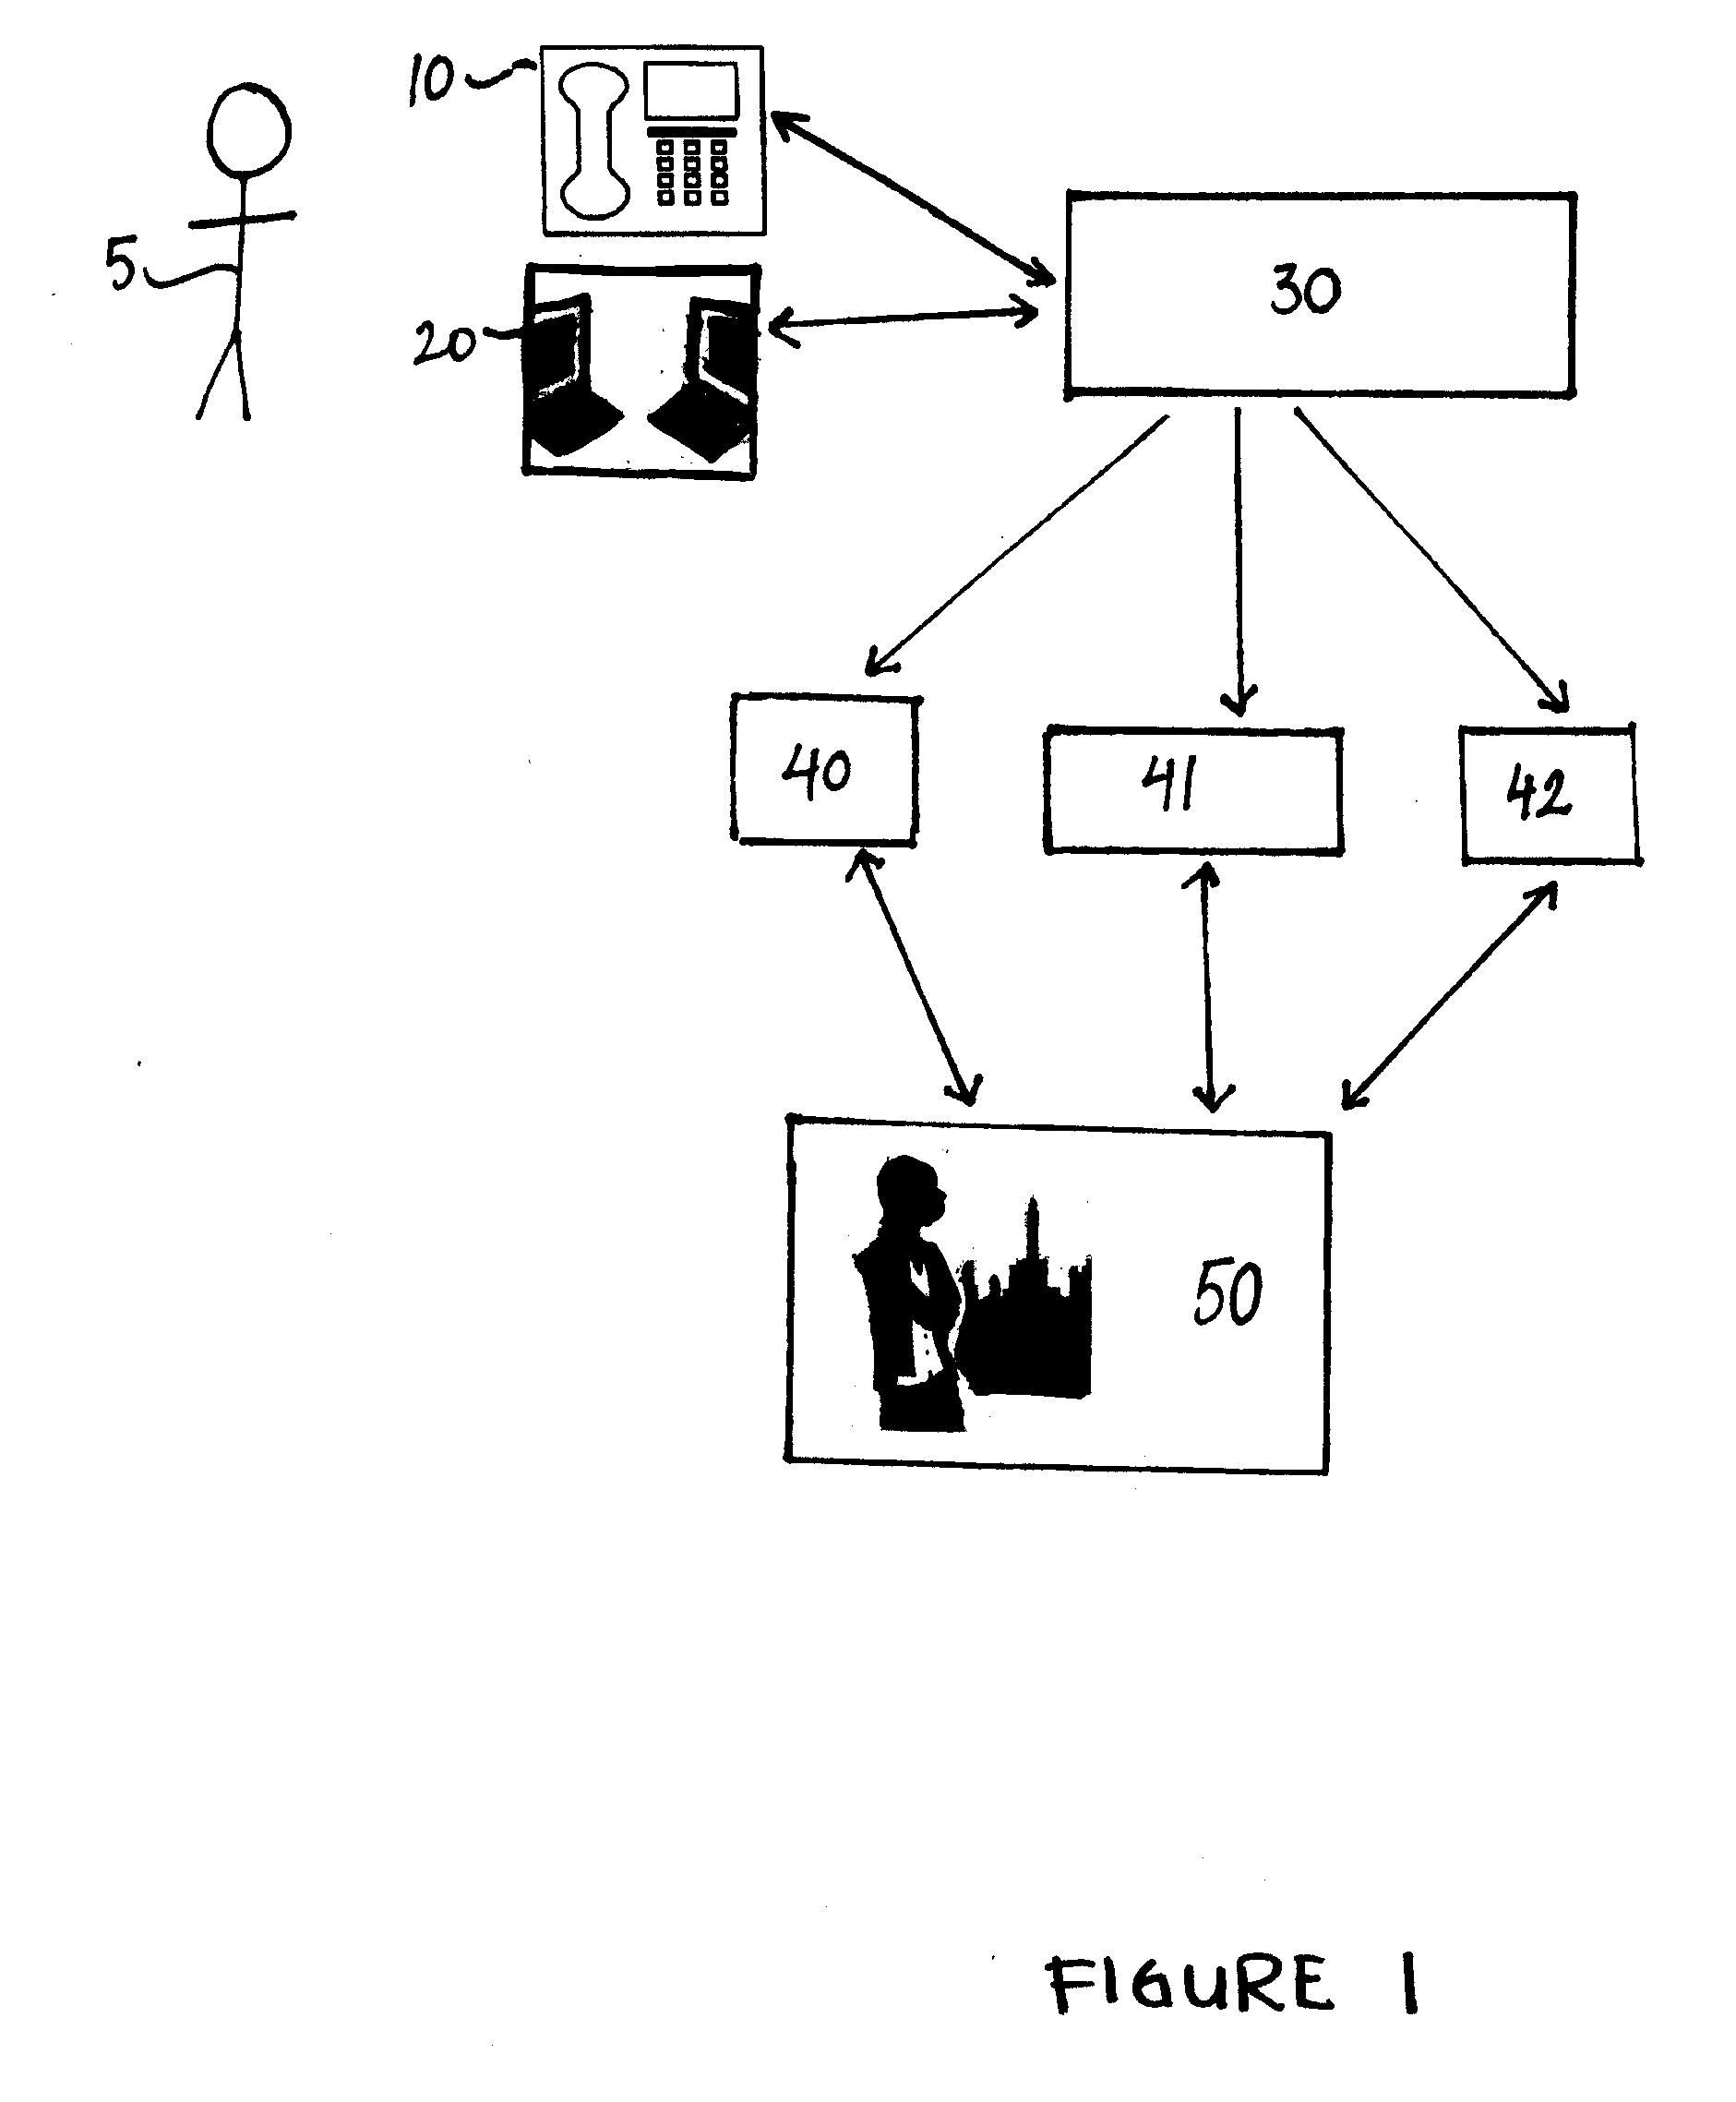 Method and Process for Electronically Posting Bulletin Board Messages